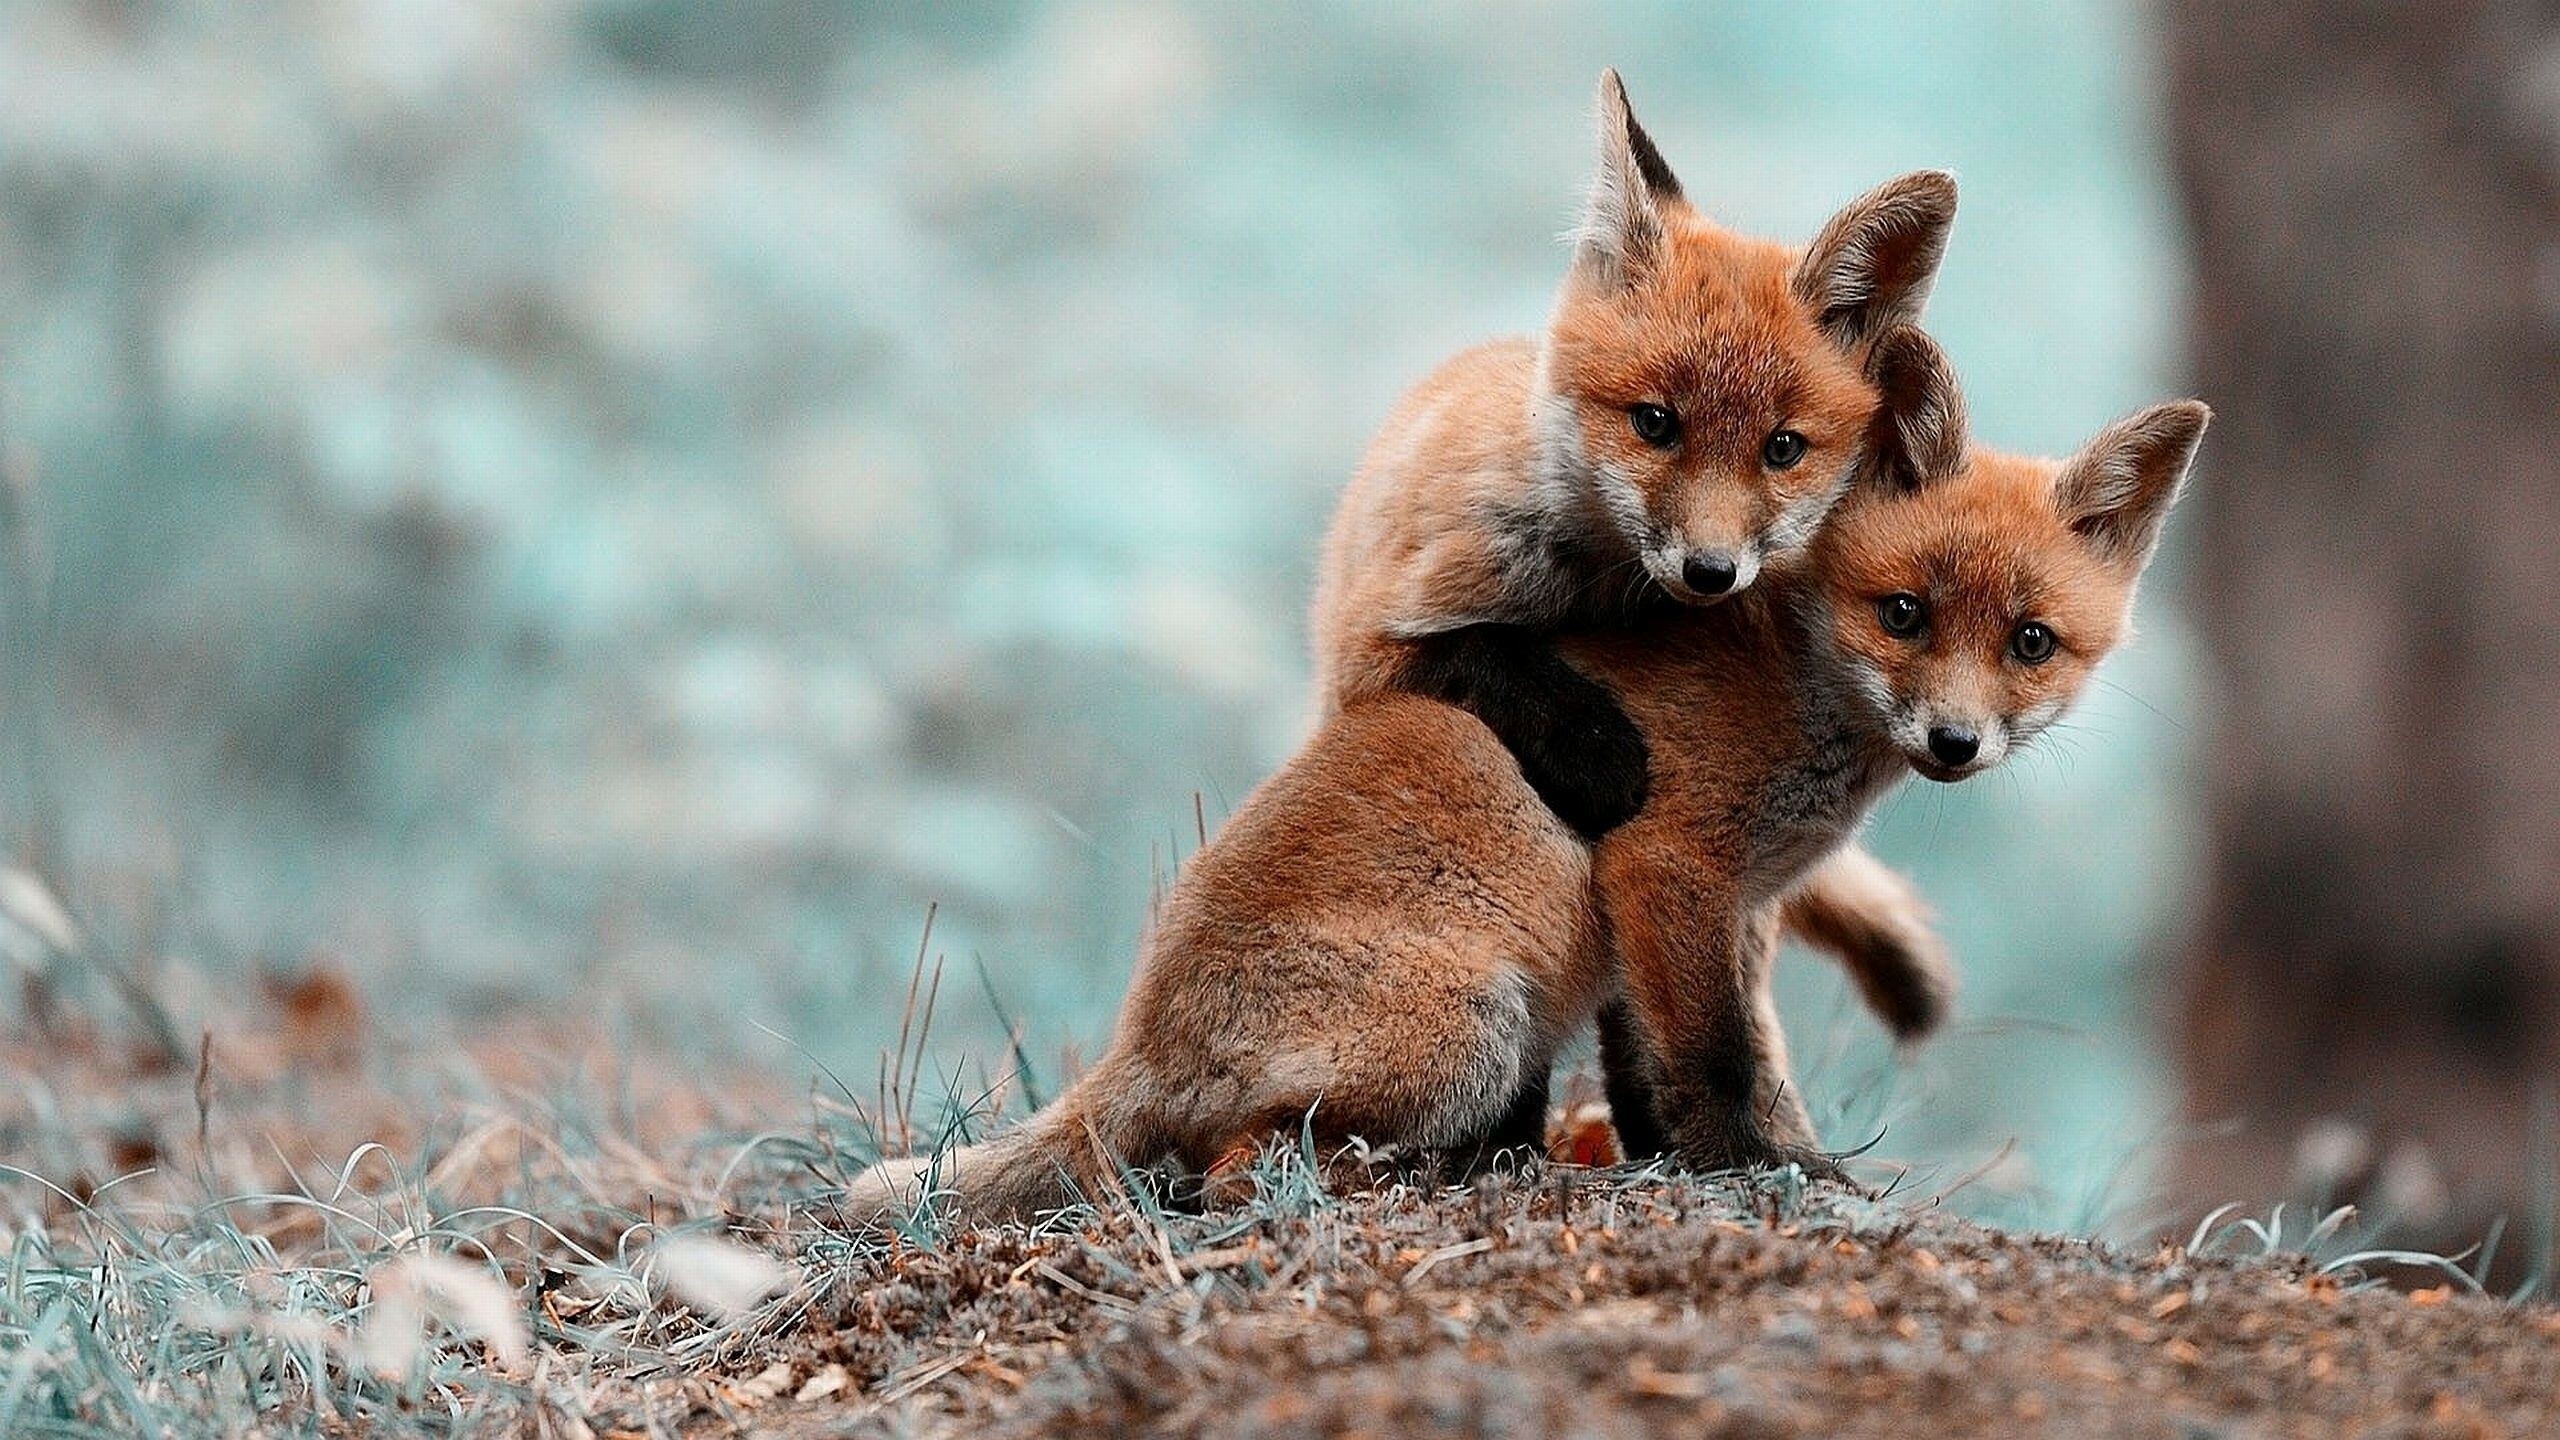 Fox: Smaller than some other members of the family Canidae such as wolves and jackals. 2560x1440 HD Wallpaper.